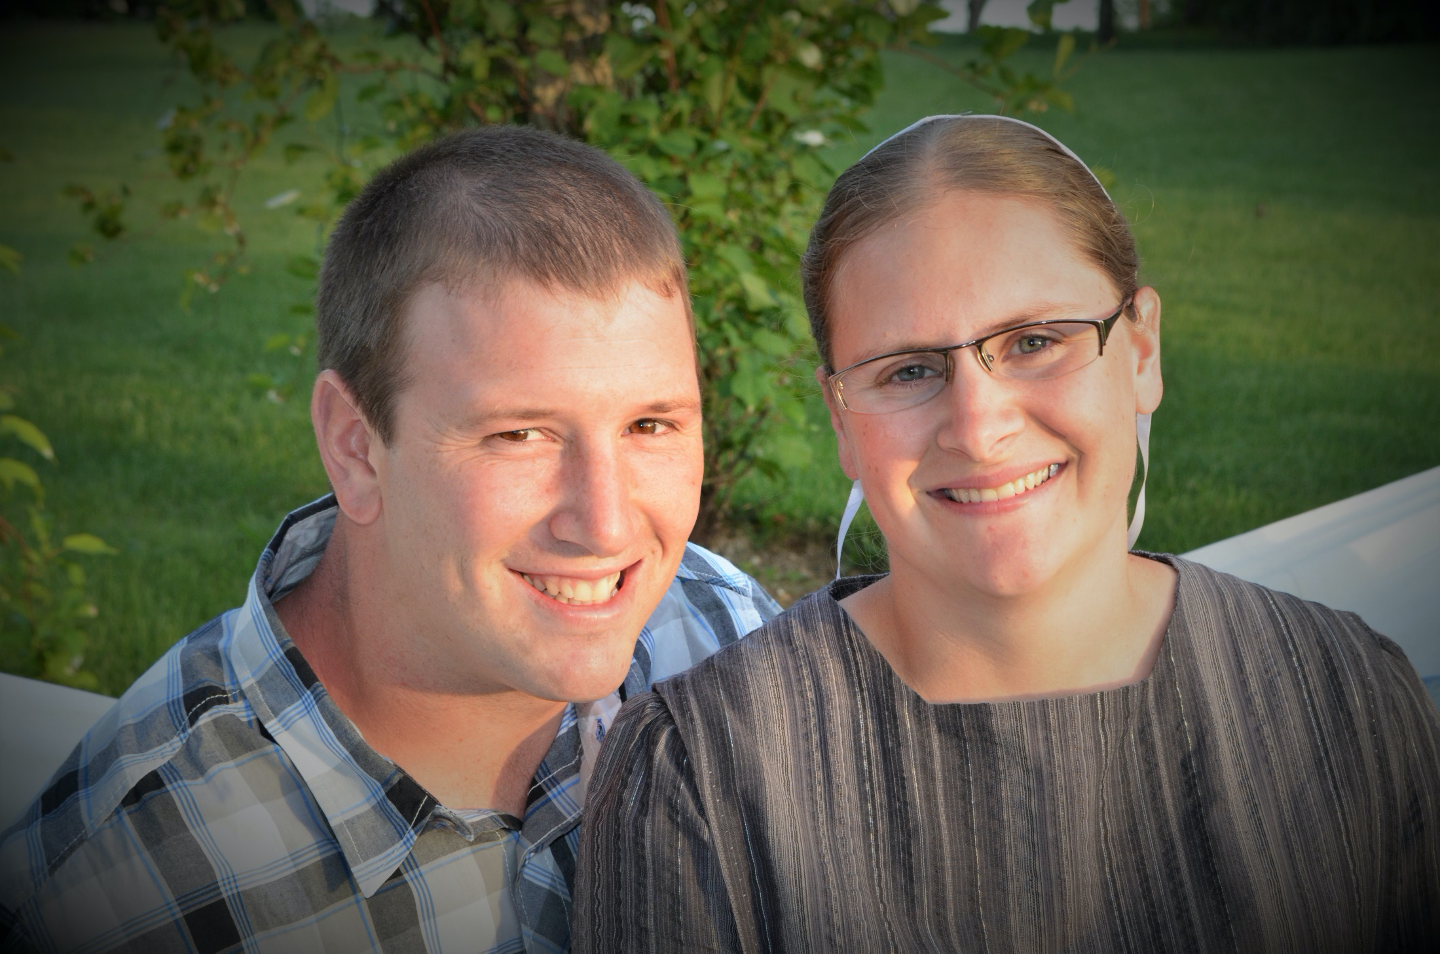 Professional portrait of young Mennonite couple outdoors.